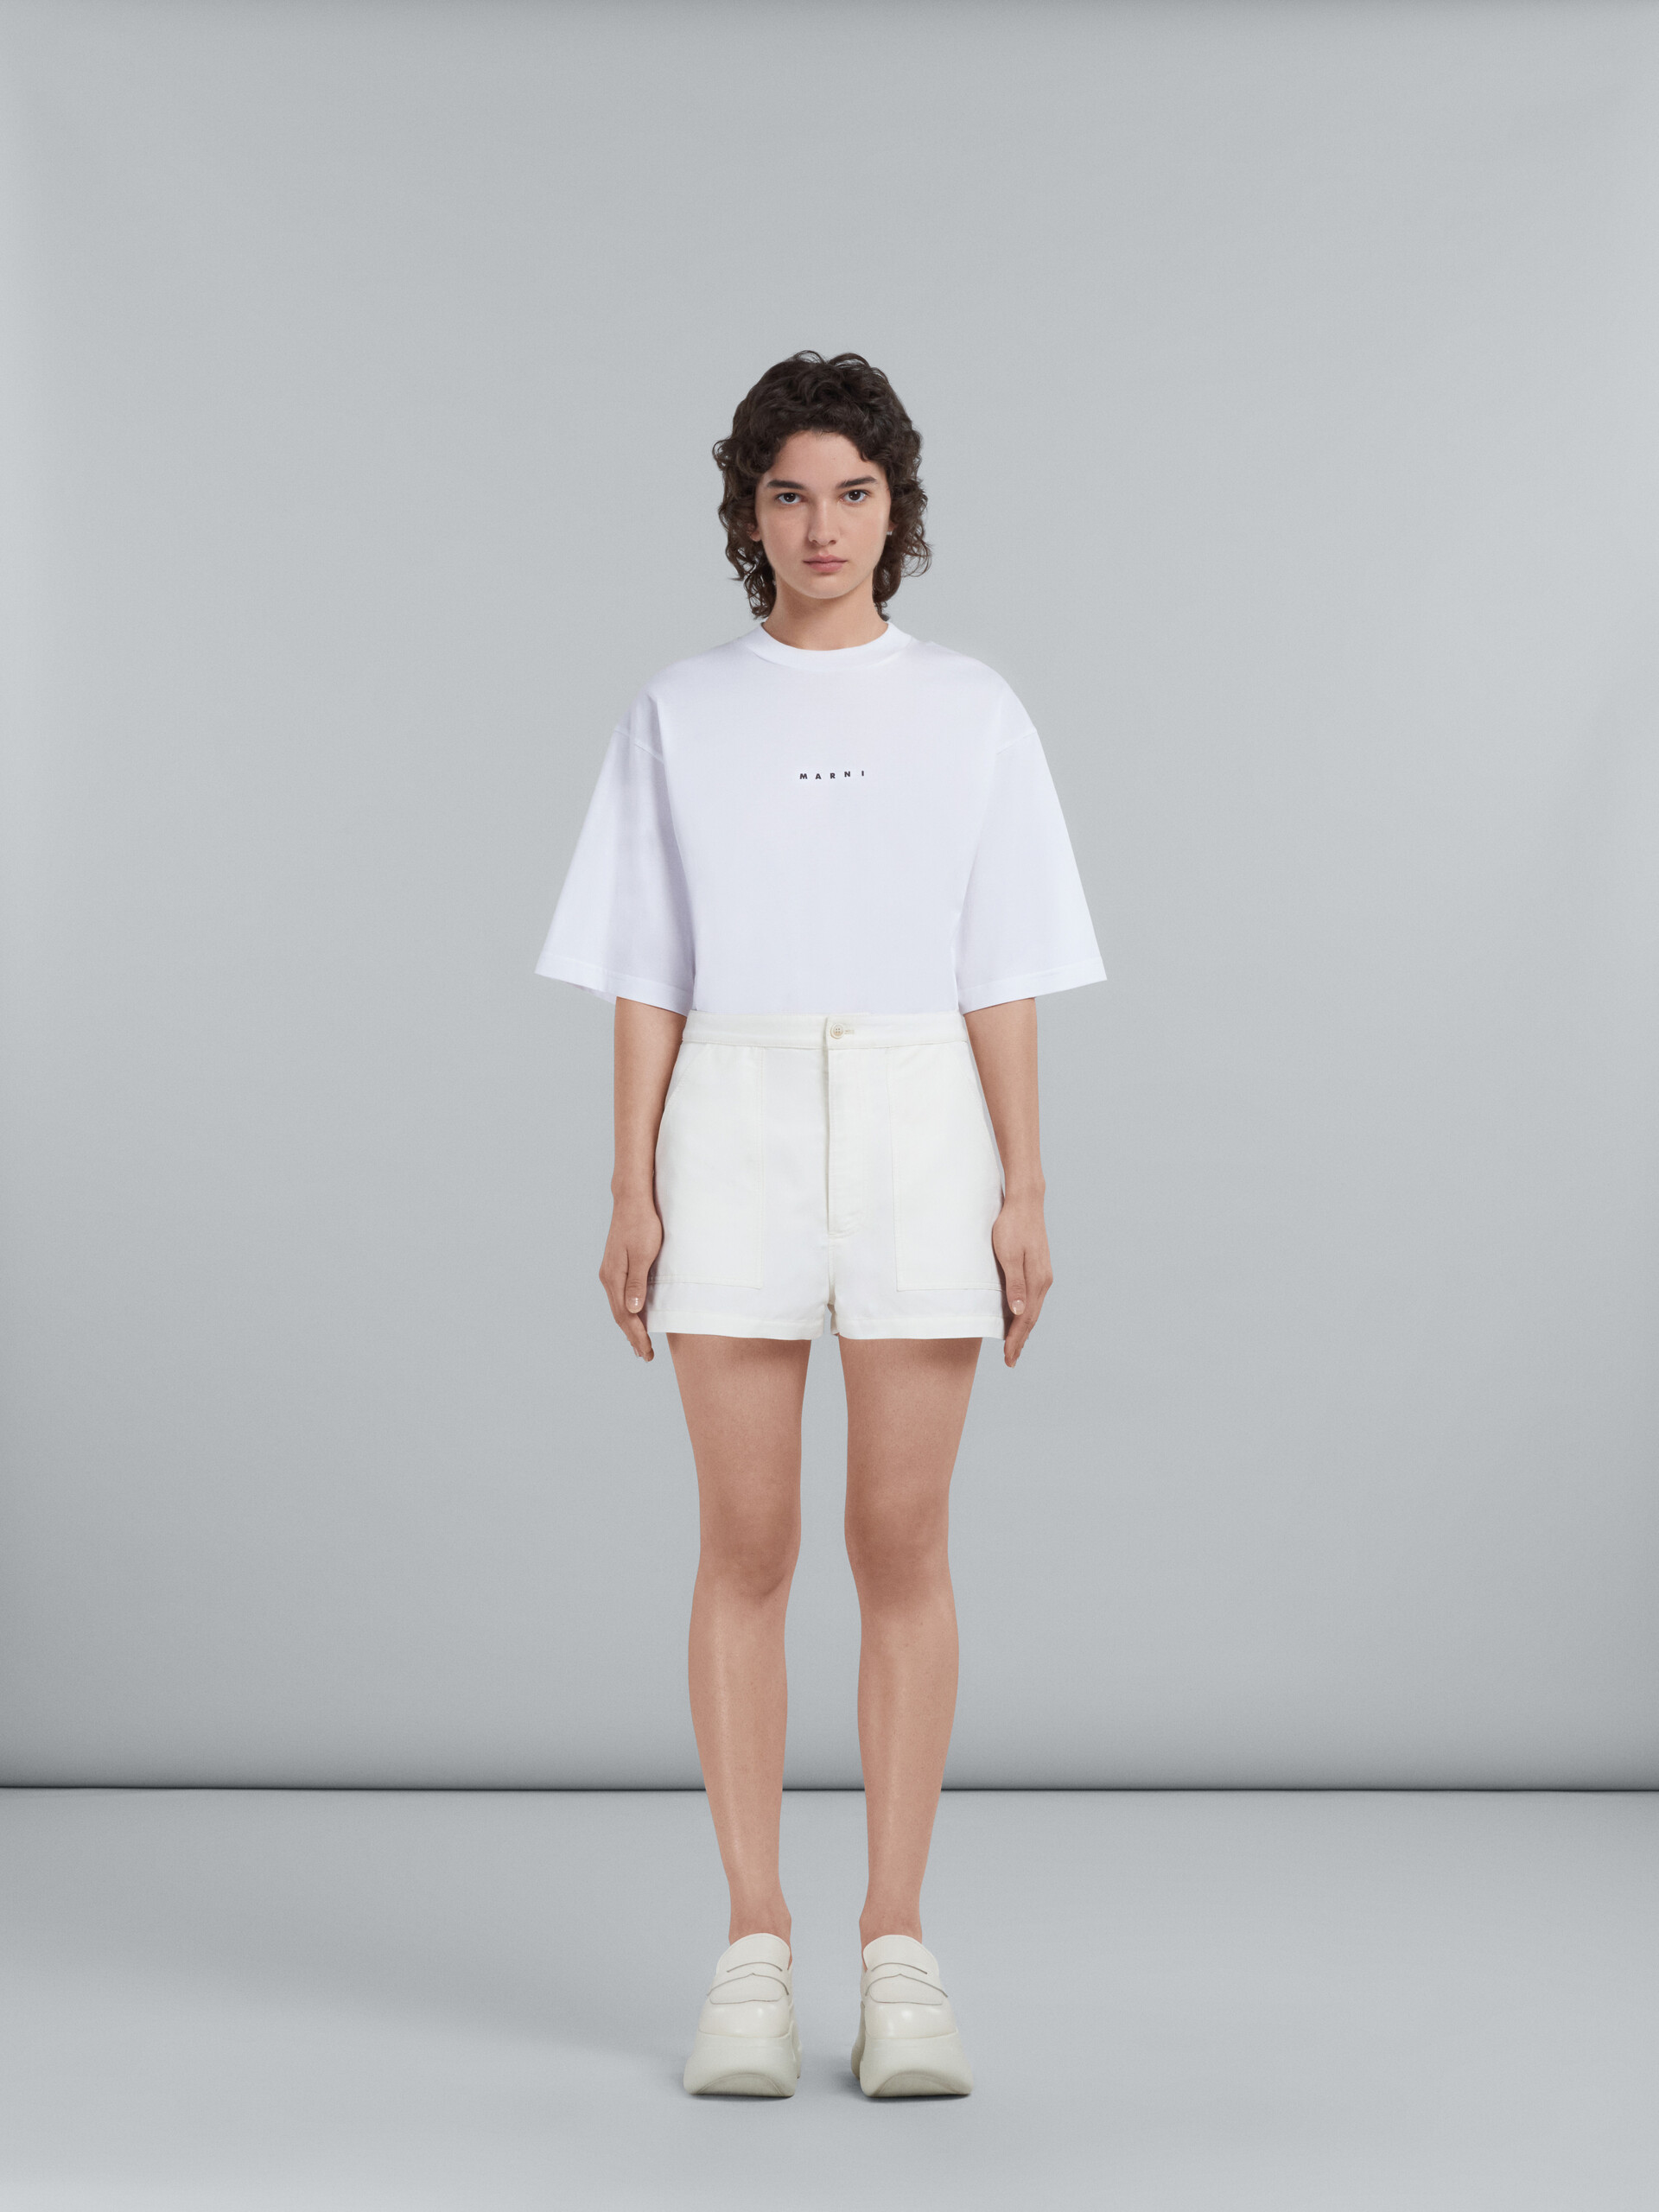 White shorts in technical cotton-linen - Pants - Image 2